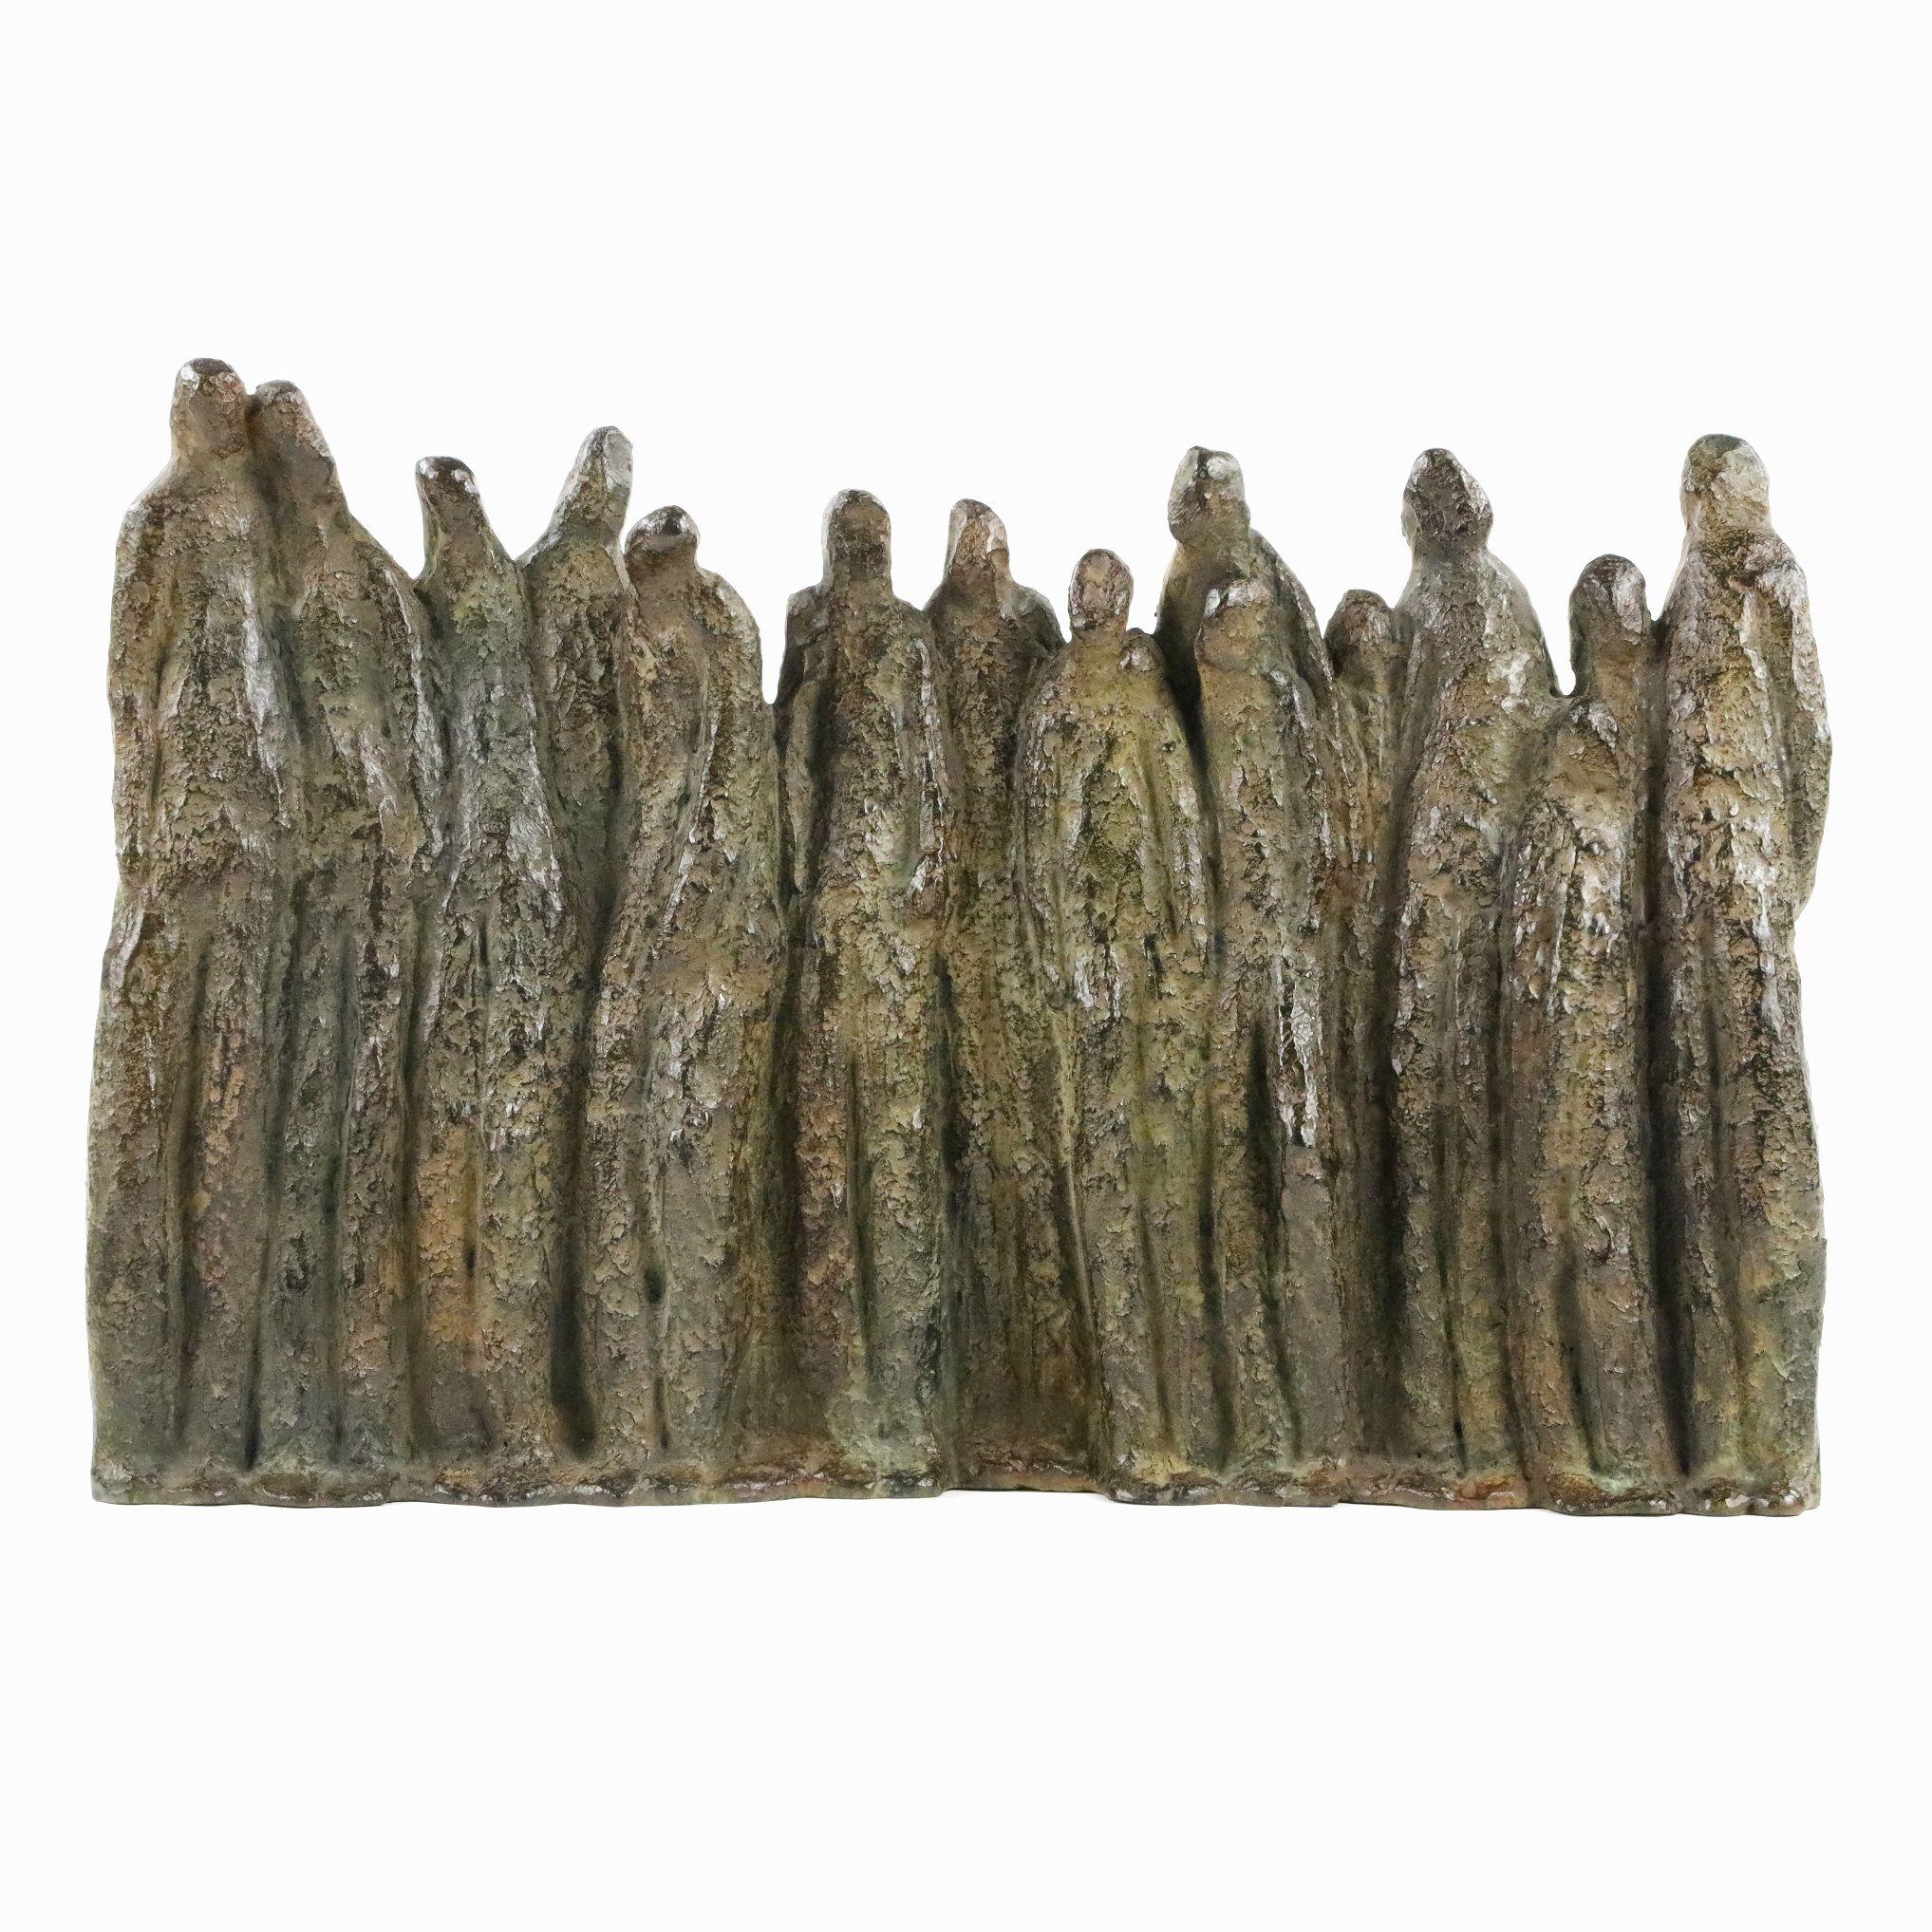 Group II by Delphine Brabant - Figurative bronze sculpture, human silhouettes  For Sale 3